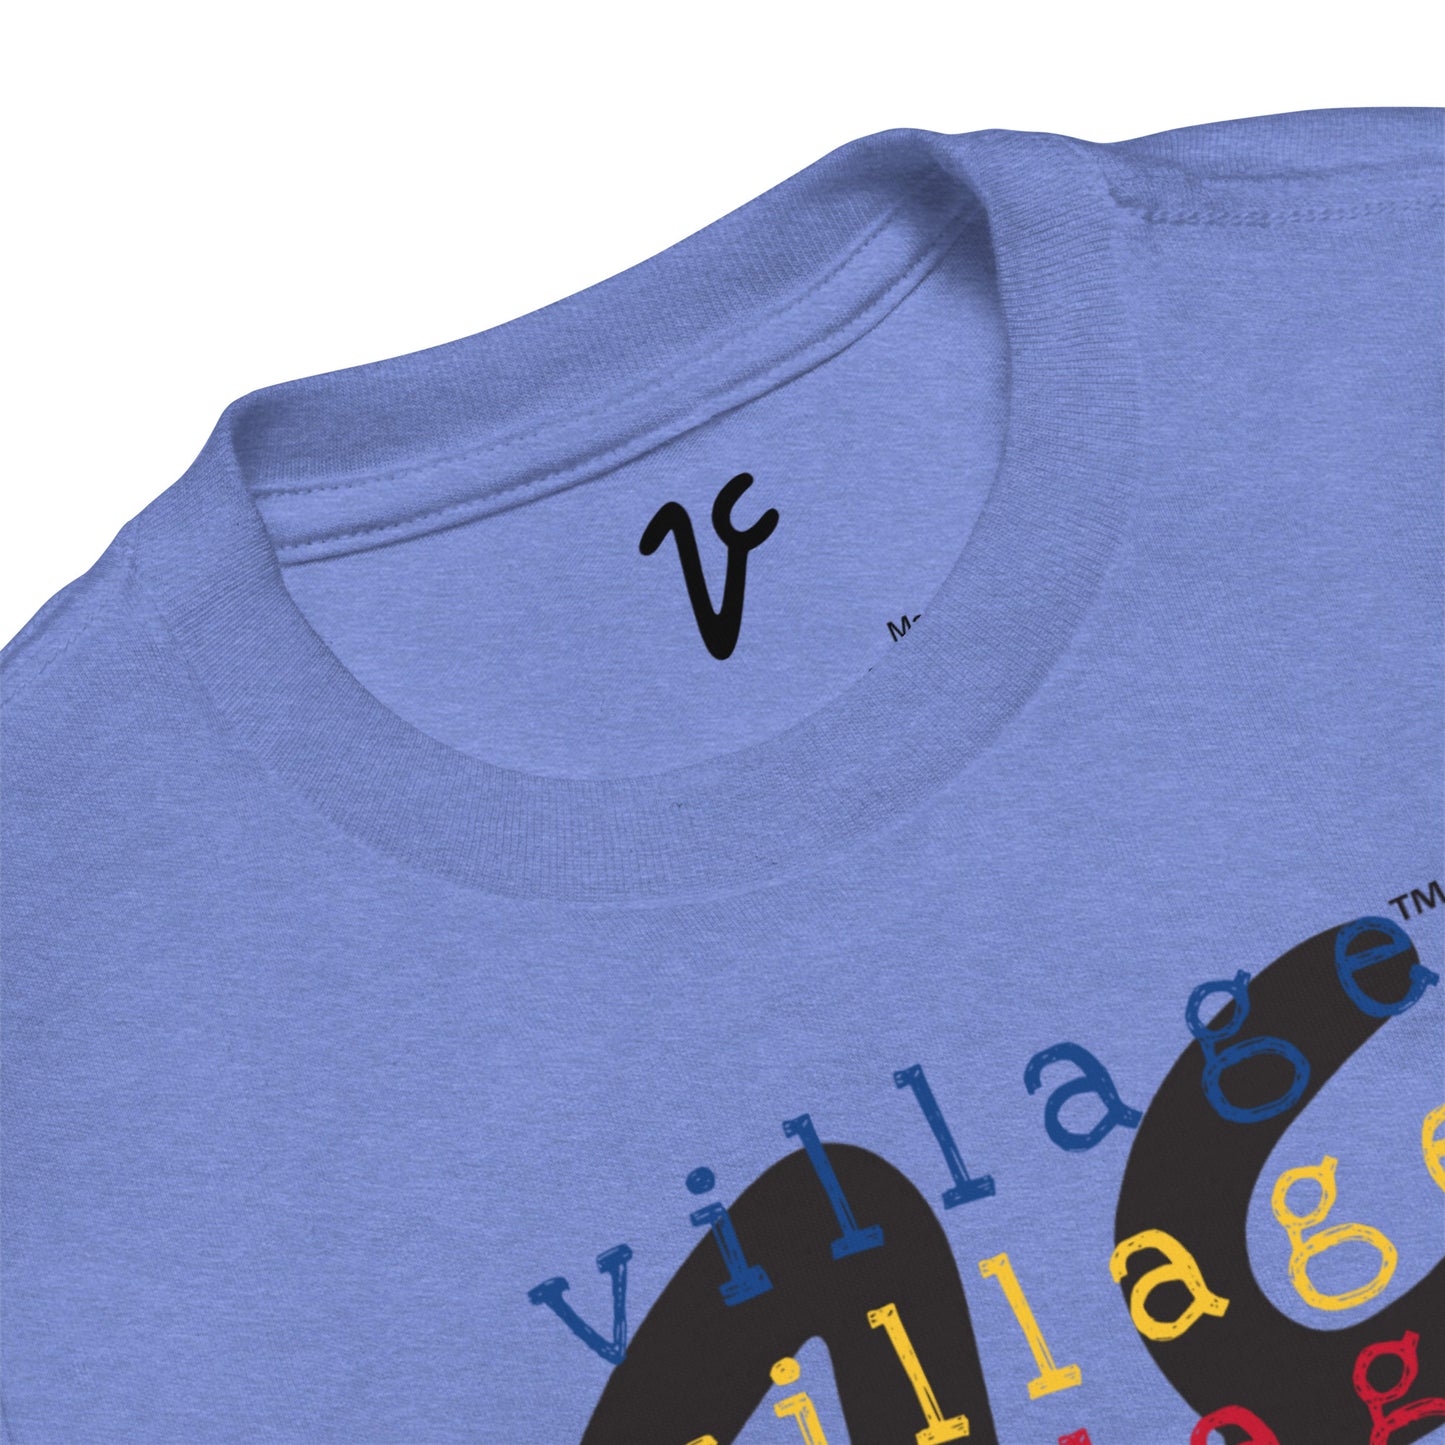 Colors VC Toddler Tee